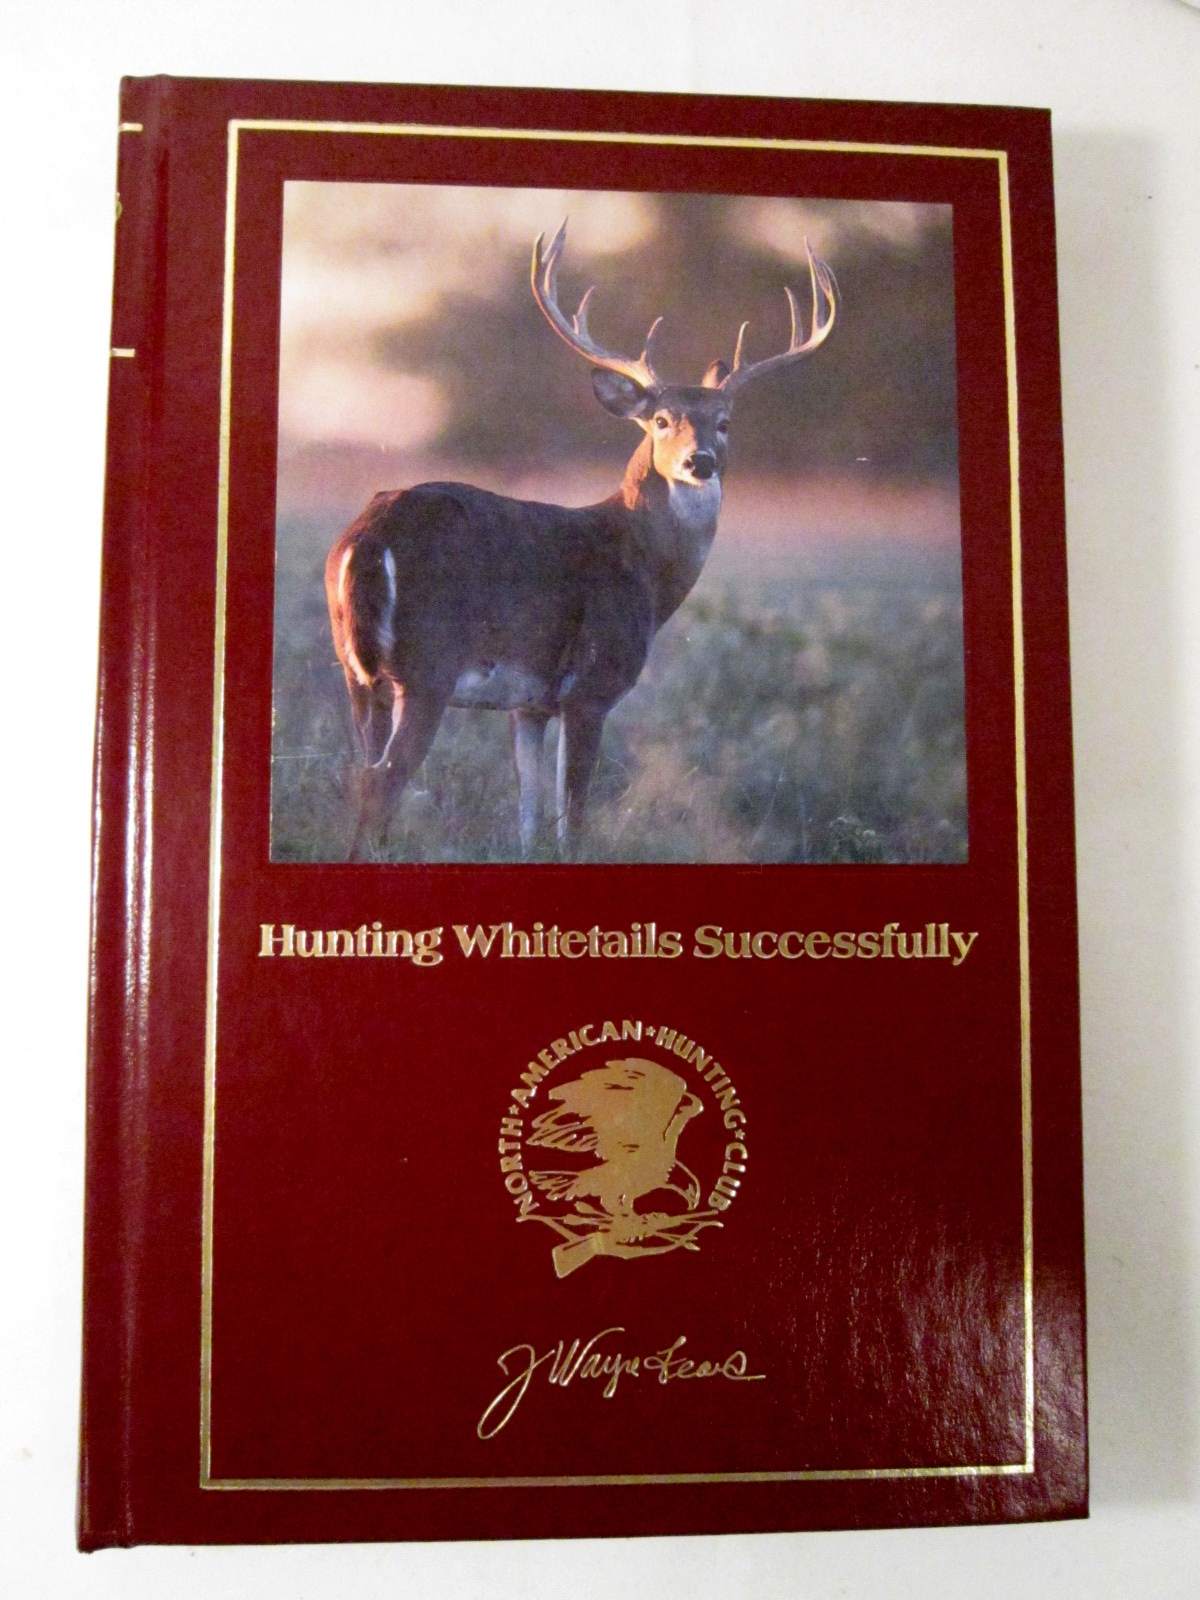 Hunting Whitetails Successfully 1996 Hardback by J Wayne Fears - Nonfiction